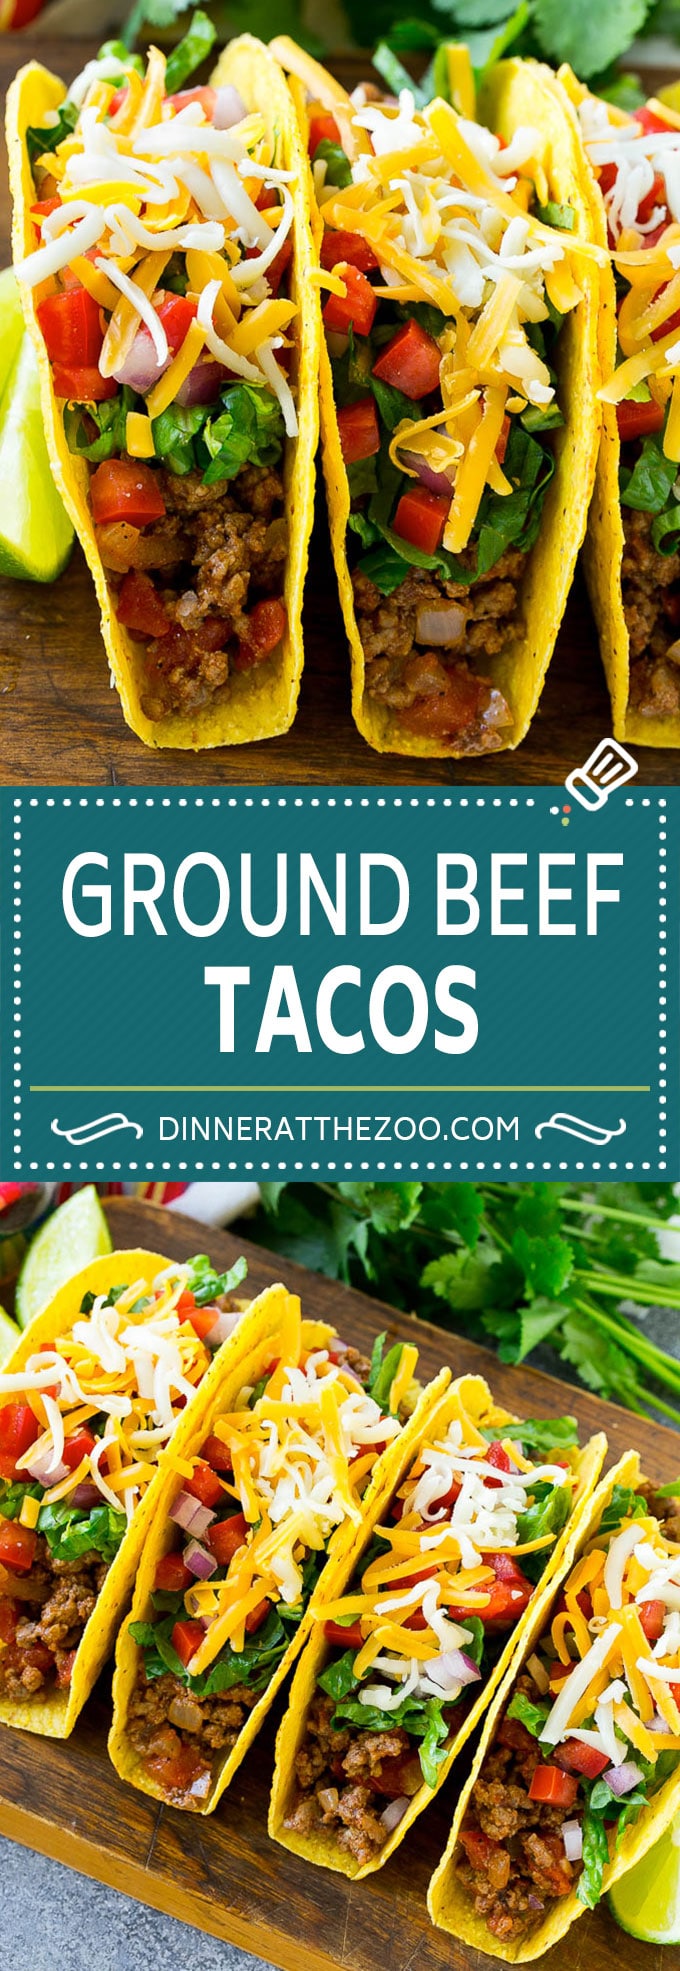 Ground Beef Tacos Recipe | Crispy Tacos | Beef Tacos #tacos #mexicanfood #tacotuesday #dinneratthezoo